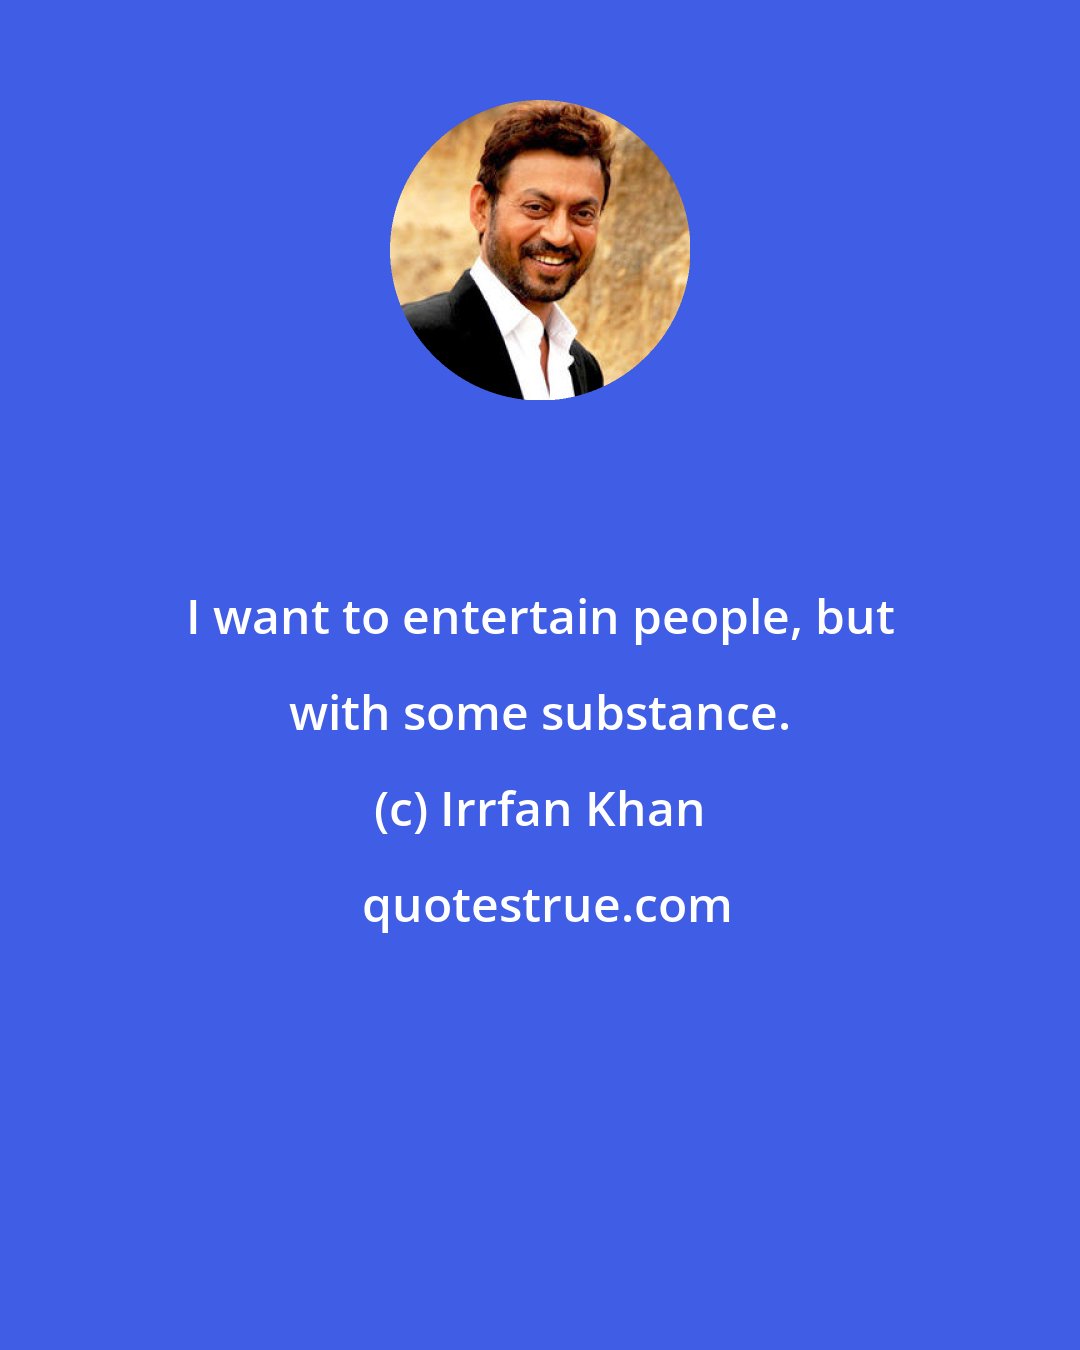 Irrfan Khan: I want to entertain people, but with some substance.